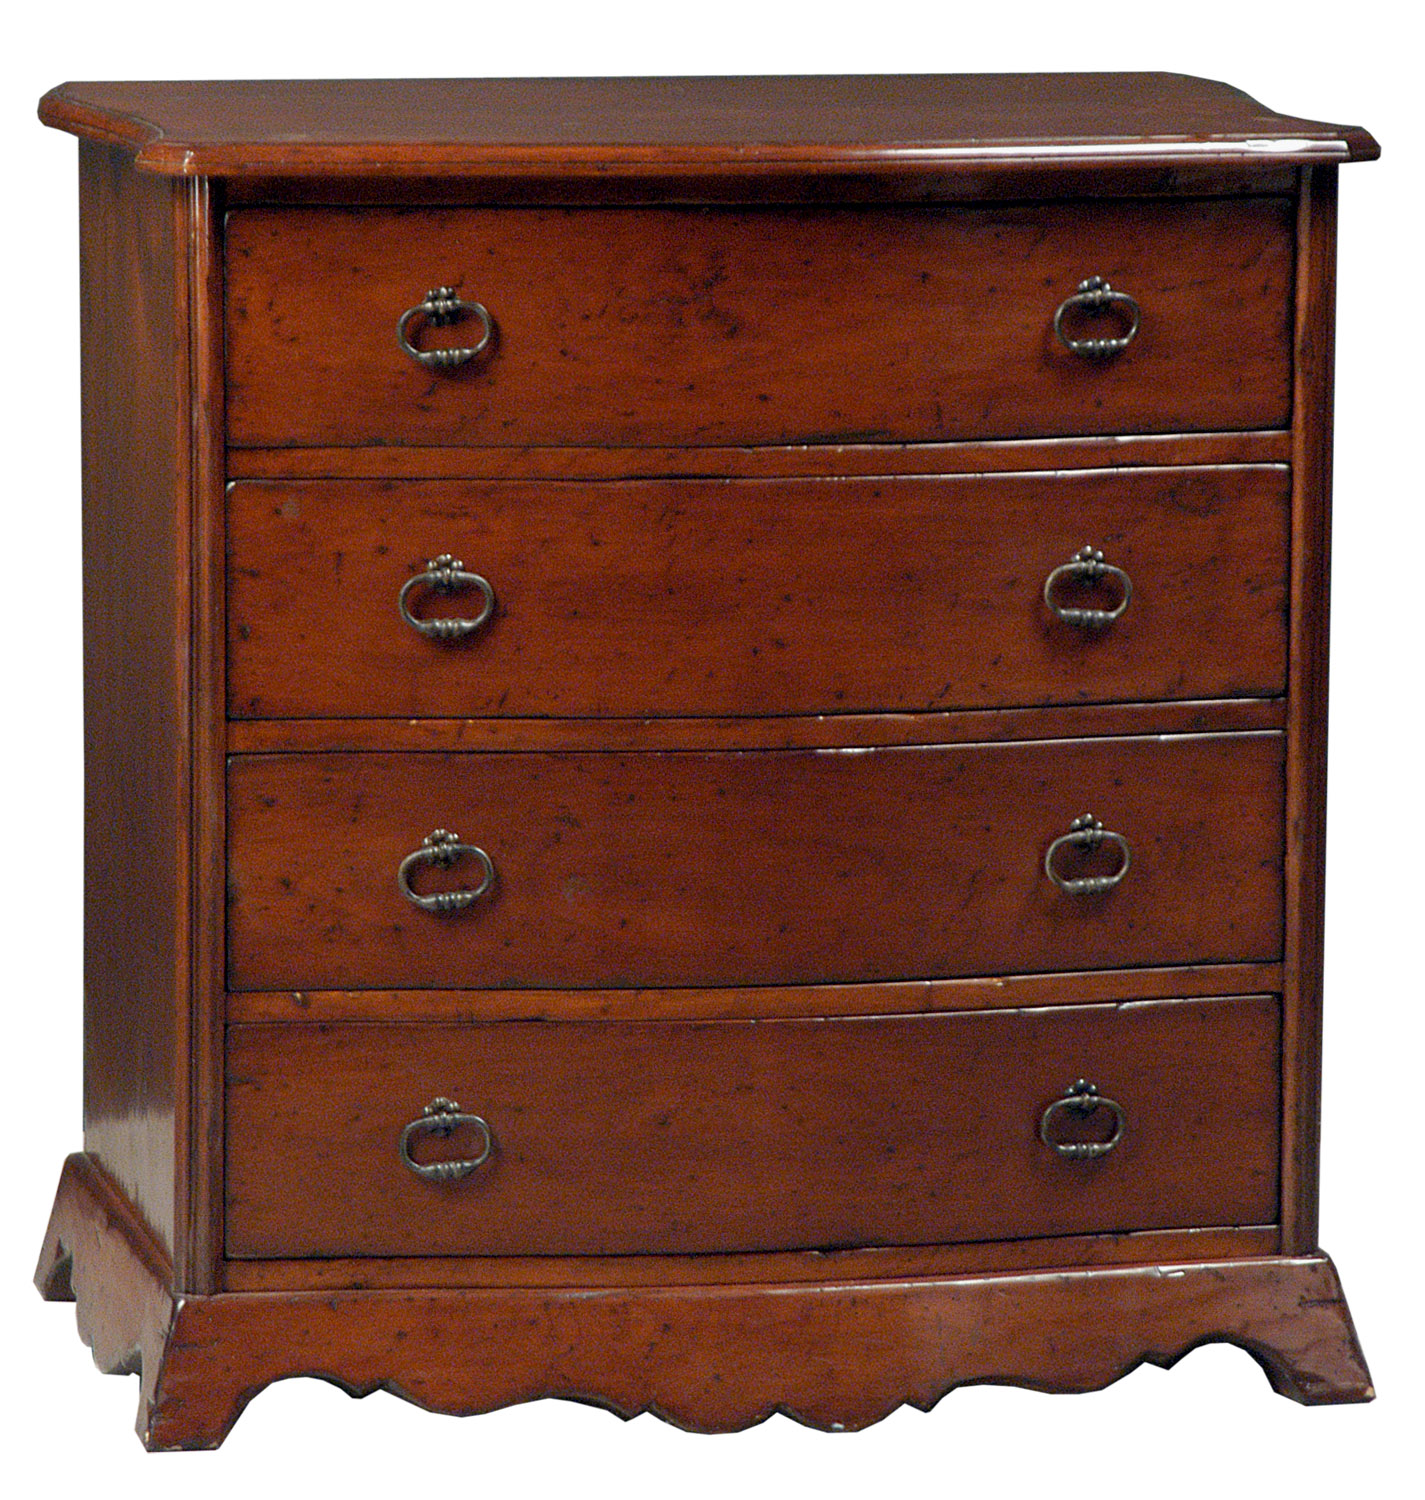 Deschanel traditional painted or stained chest of drawers dresser by Woodland furniture in Idaho Falls